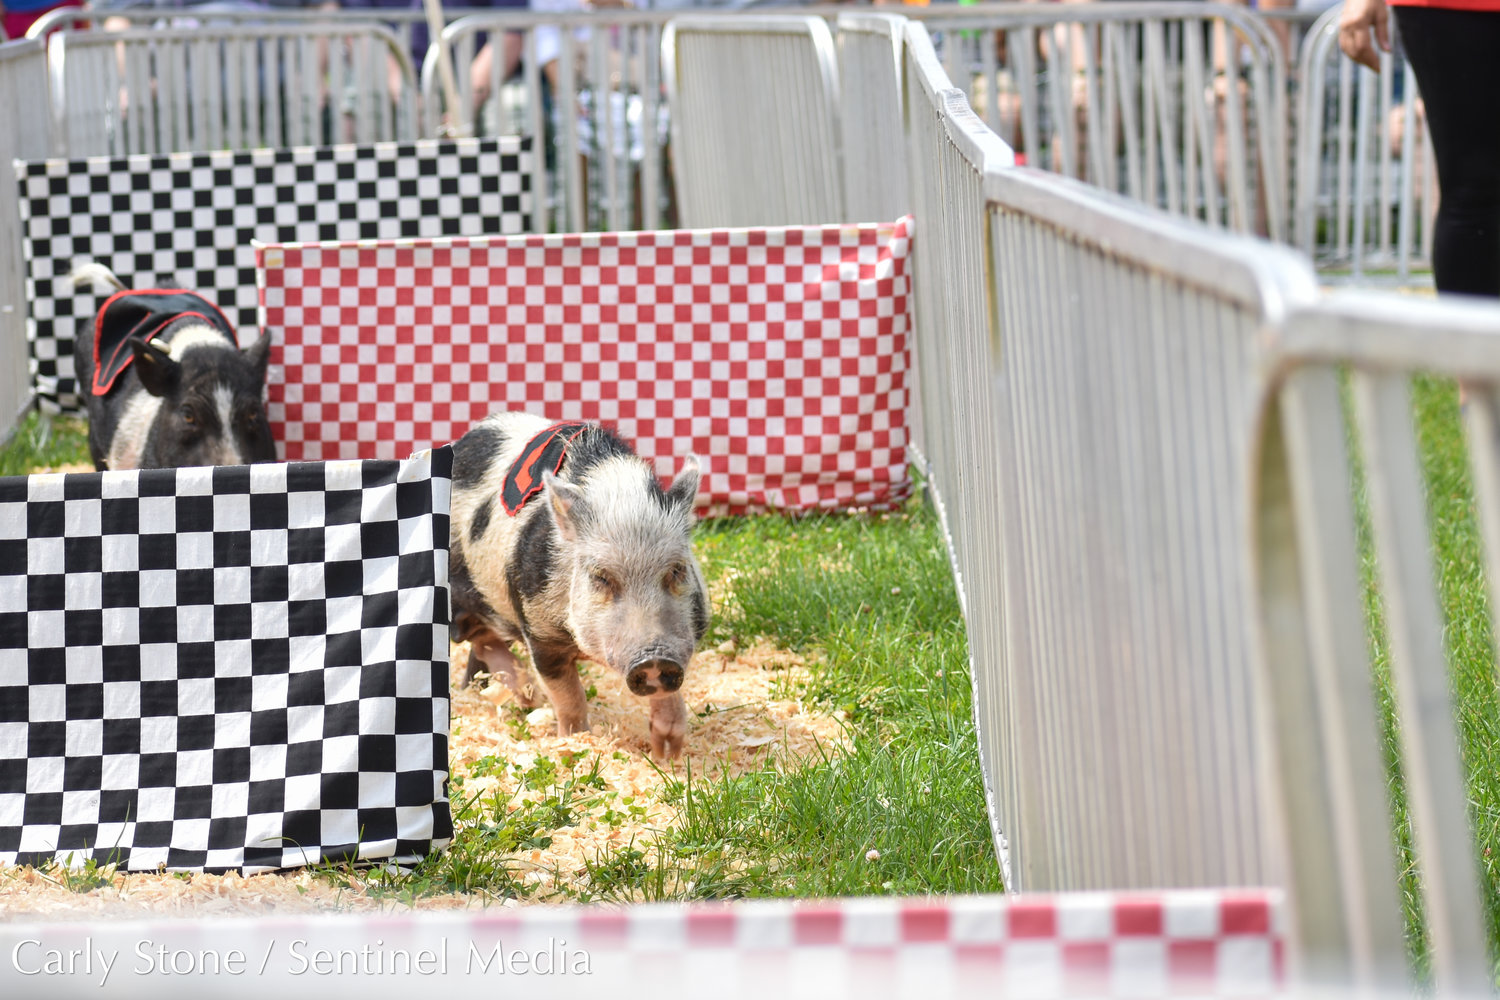 Two pigs — "Baconator," and "Dale Earnhog Jr." — race through the obstacles as part of the Hollywood Racing Pigs show at the NYS Fair. The race takes place near the Family Fun Zone.